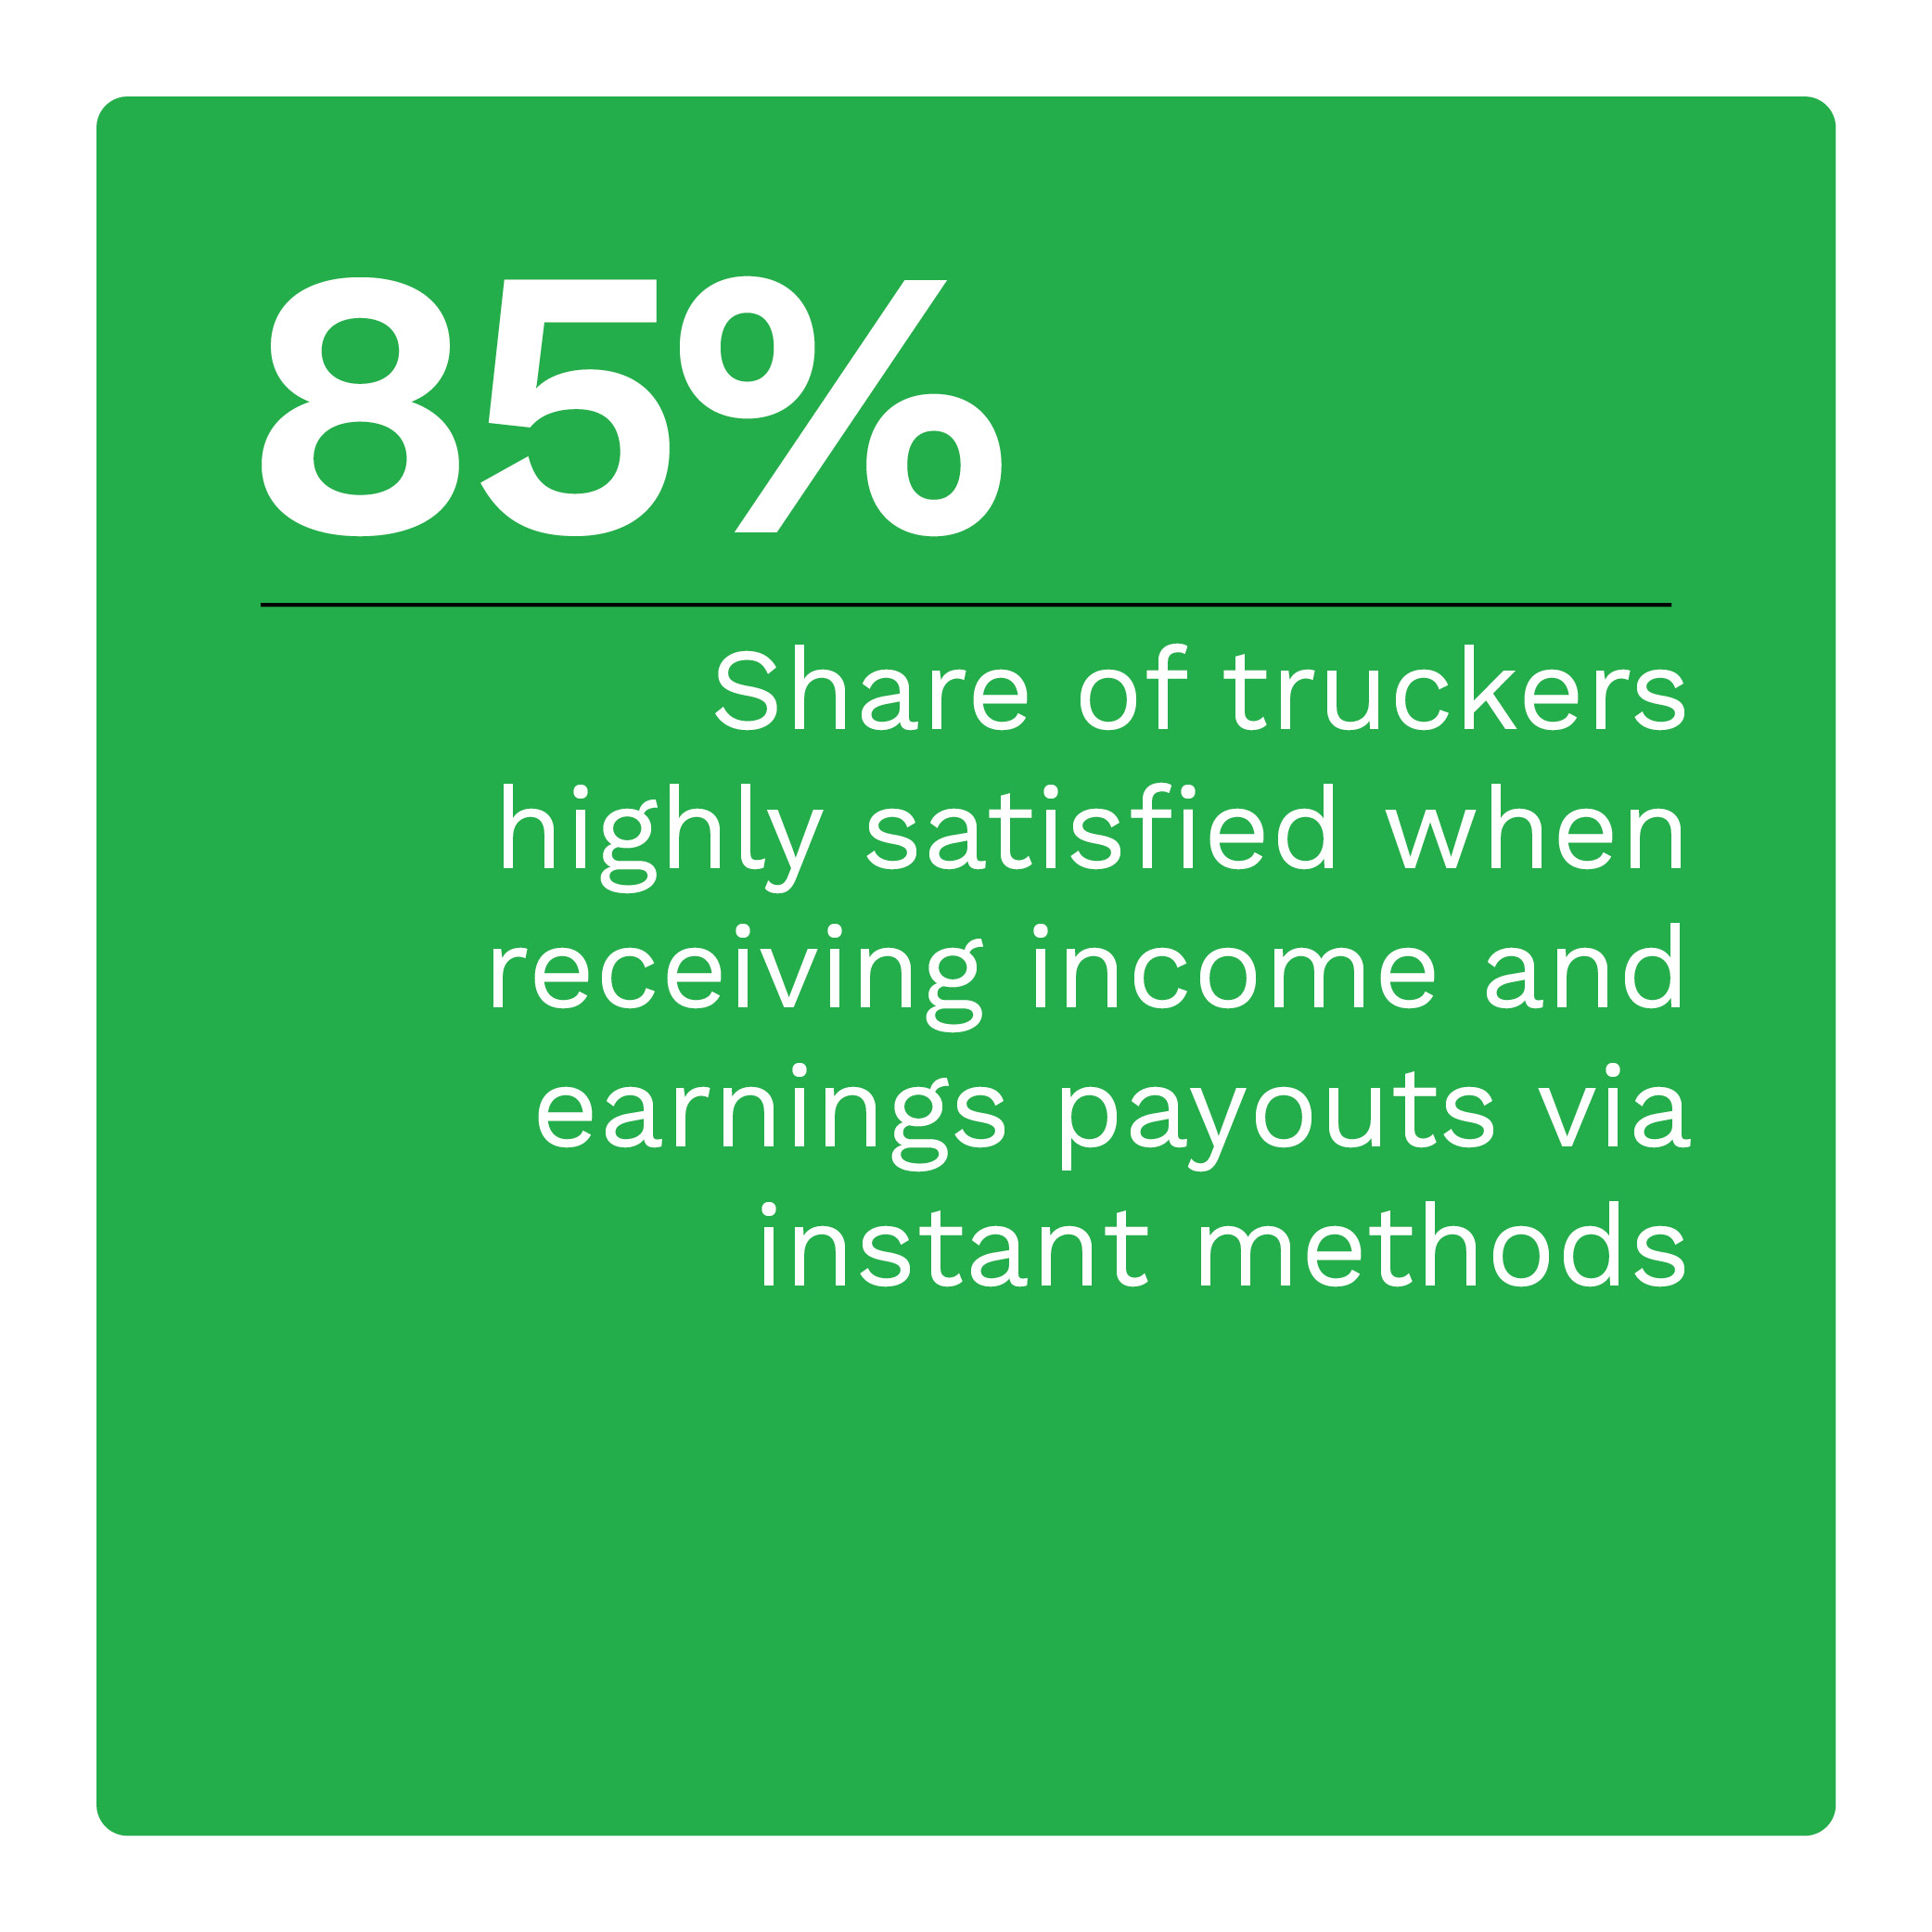  Share of truckers highly satisfied when receiving income and earnings payouts via instant methods 